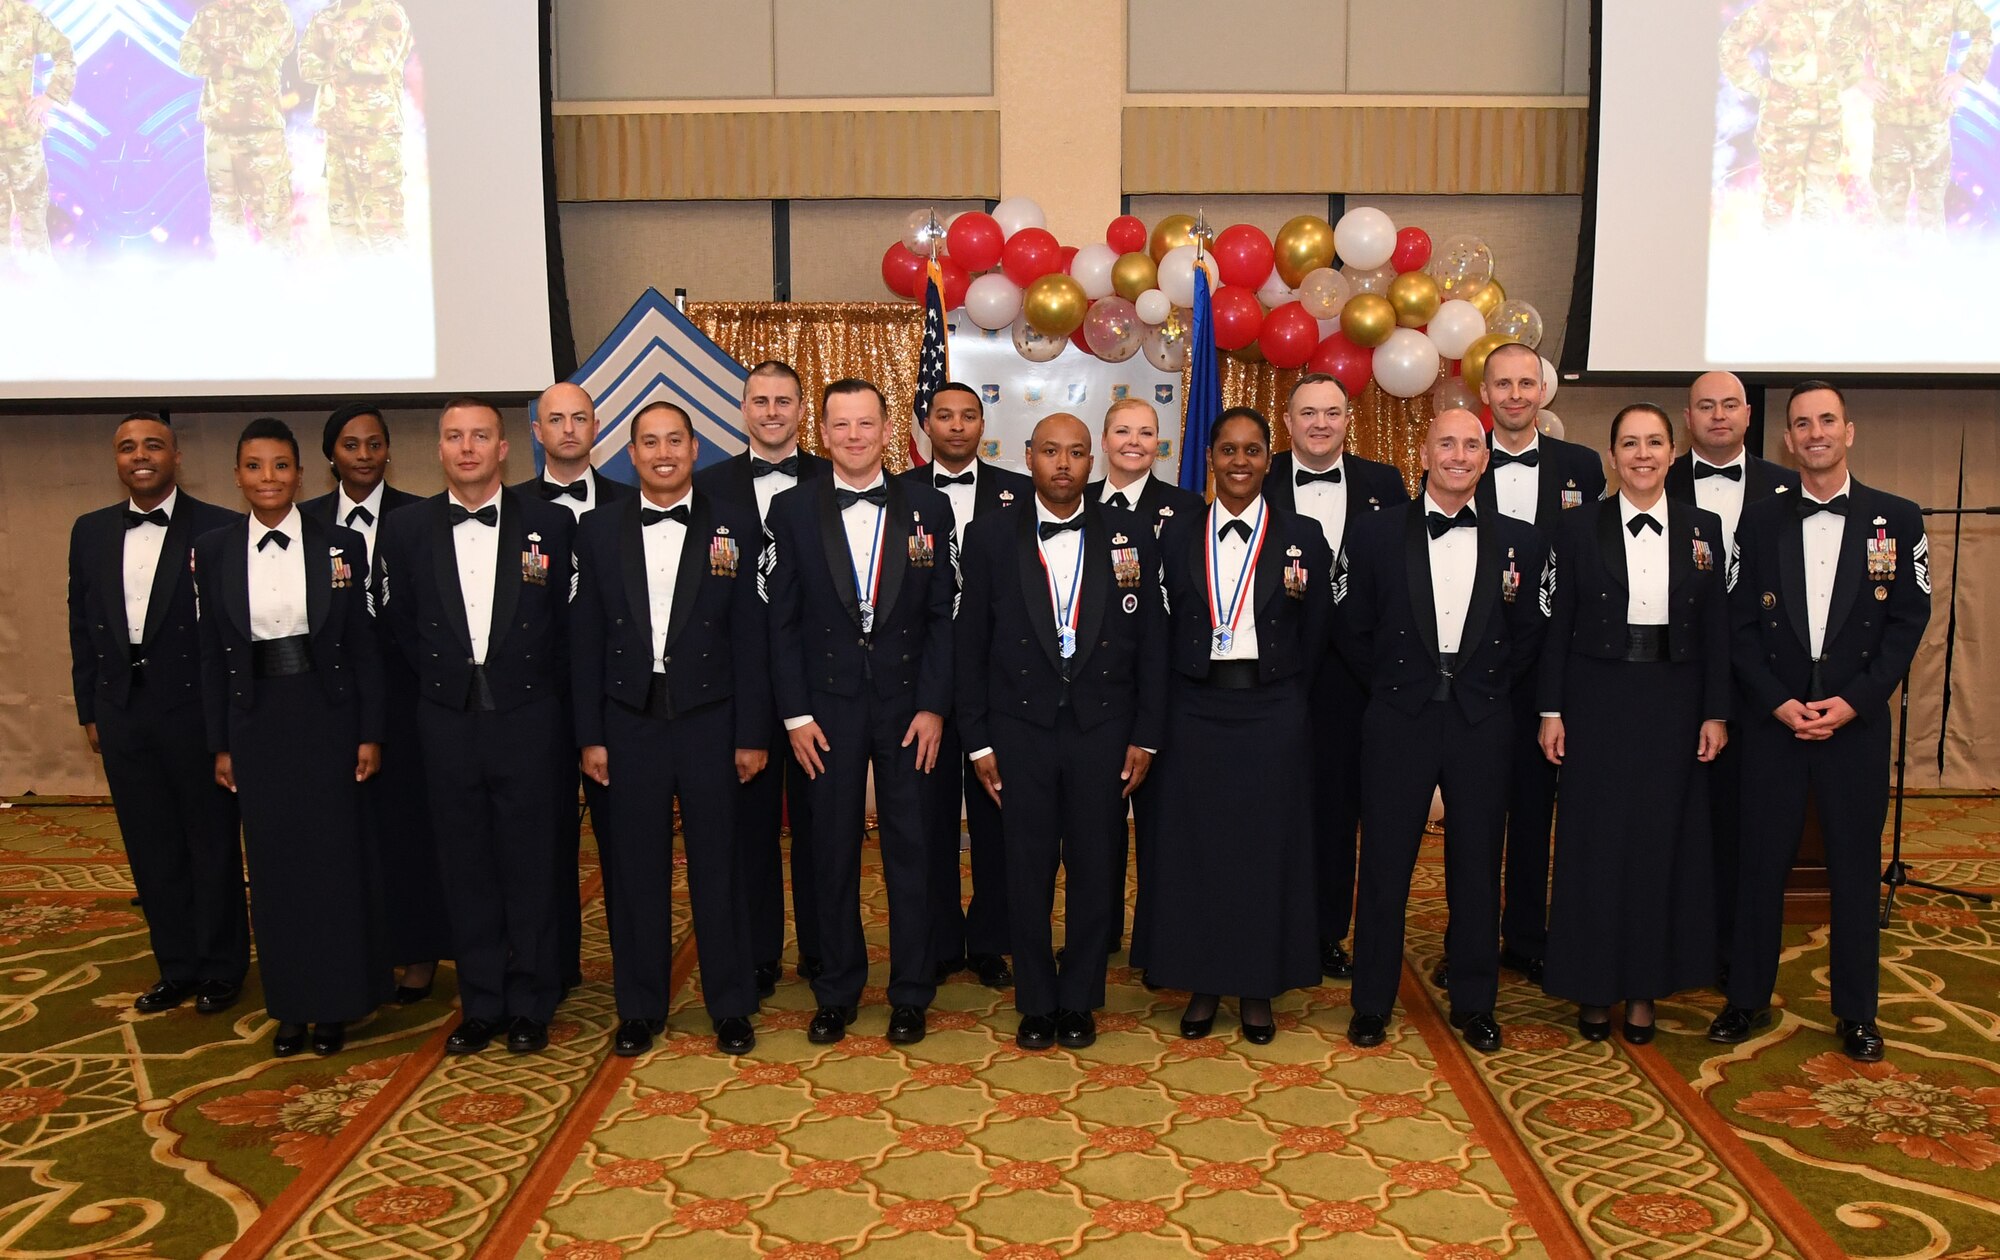 Recently inducted and current Keesler chief master sergeants pose for a photo during the Chief Master Sergeant Recognition Ceremony inside the Bay Breeze Event Center at Keesler Air Force Base, Mississippi, April 8, 2022. Four Keesler Airmen earned their chief master sergeant stripe during the 2022 promotion release. Chief master sergeants make up one percent of the Air Force enlisted force. (U.S. Air Force photo by Kemberly Groue)